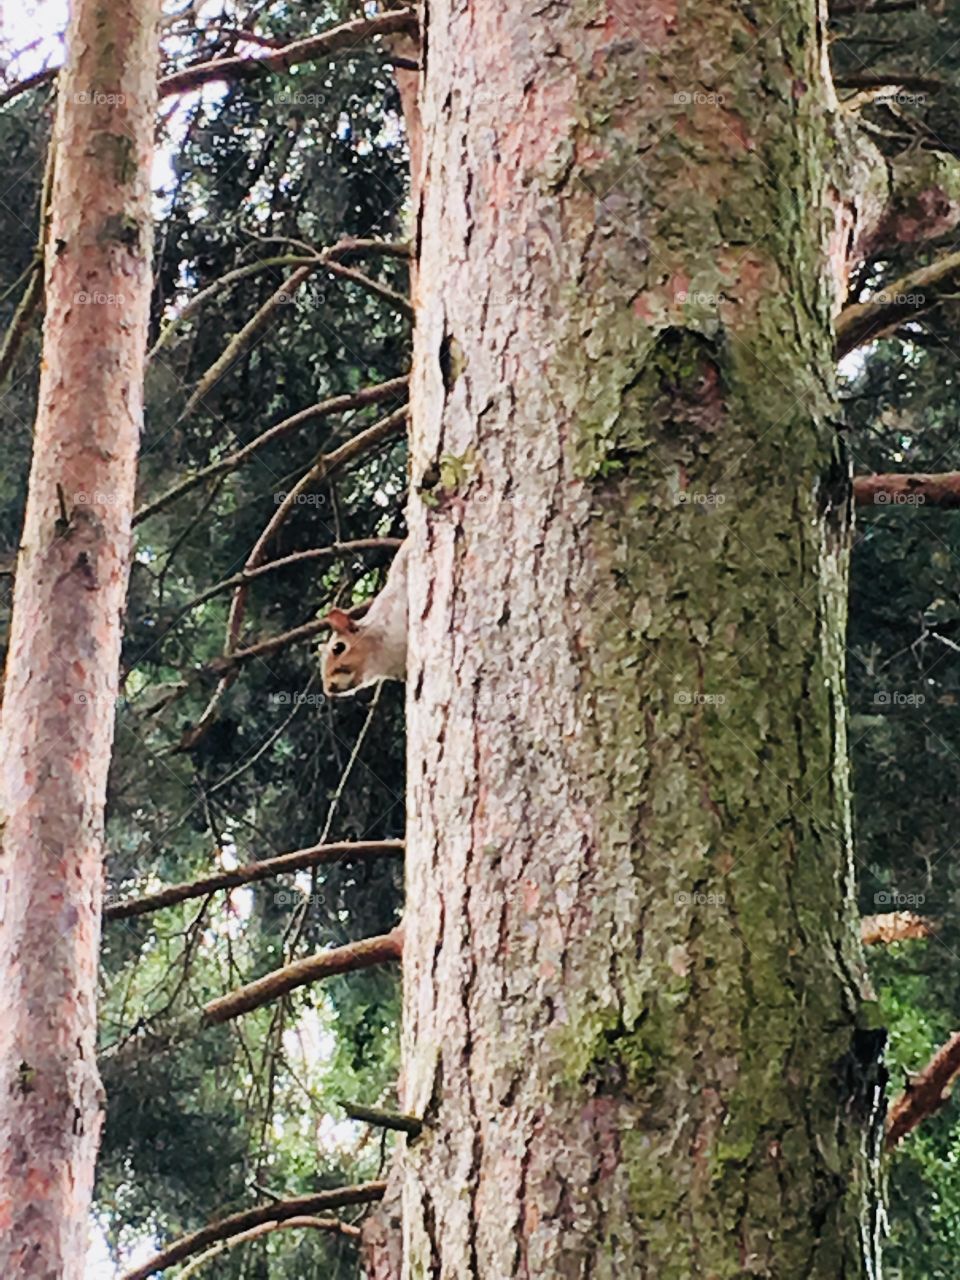 Squirrel peeping around the trunk of a pine tree in my garden